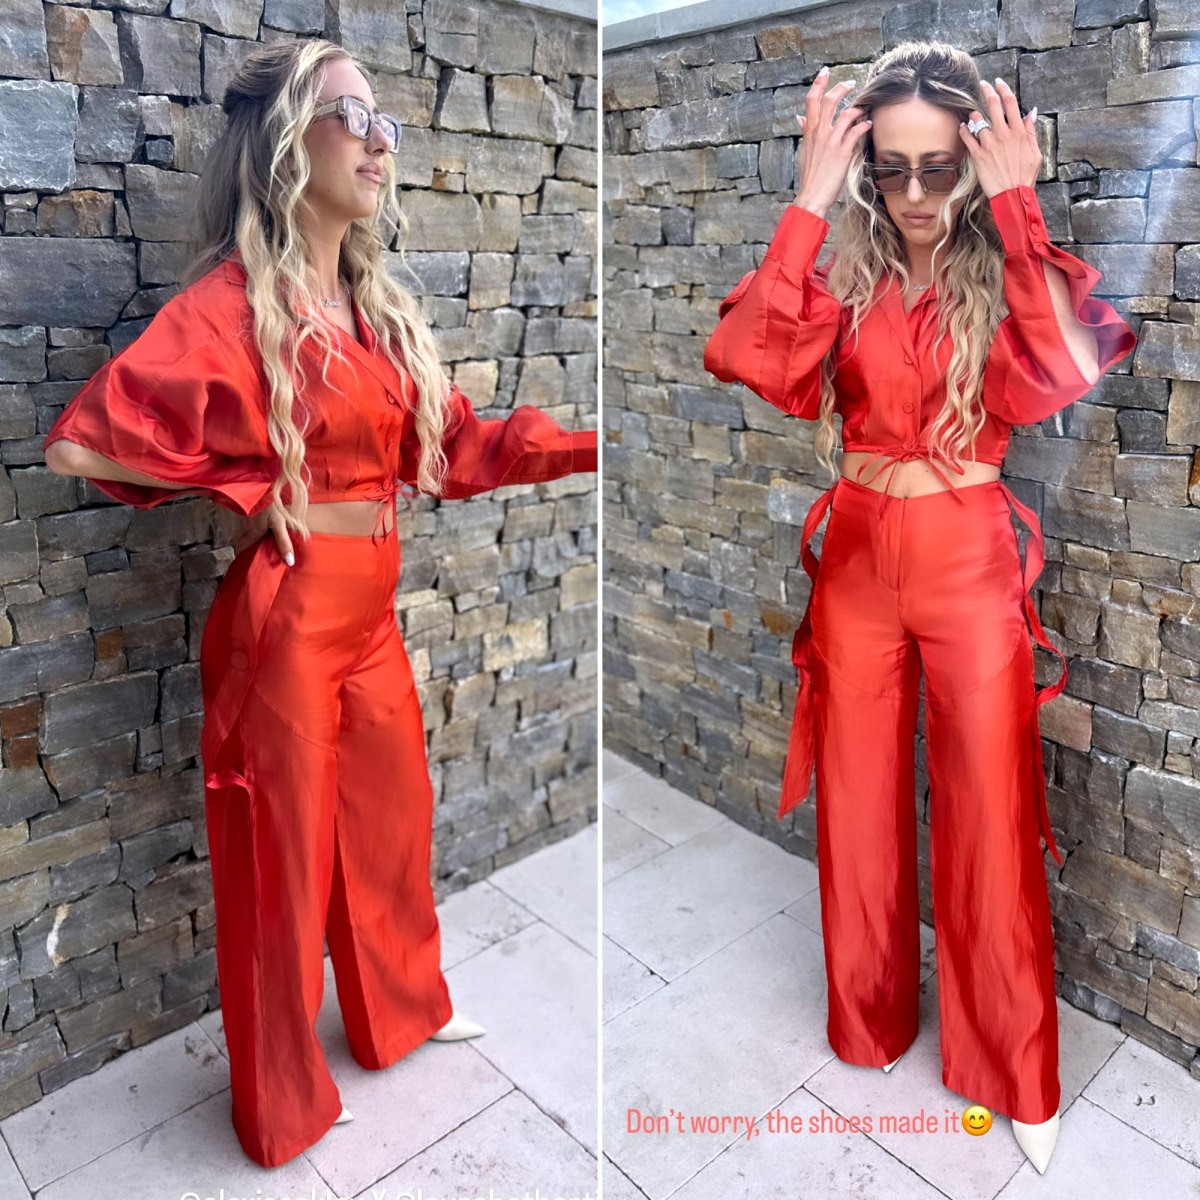 Patrick Mahomes Wife Brittany Does Chiefs-Red Loungewear at Super